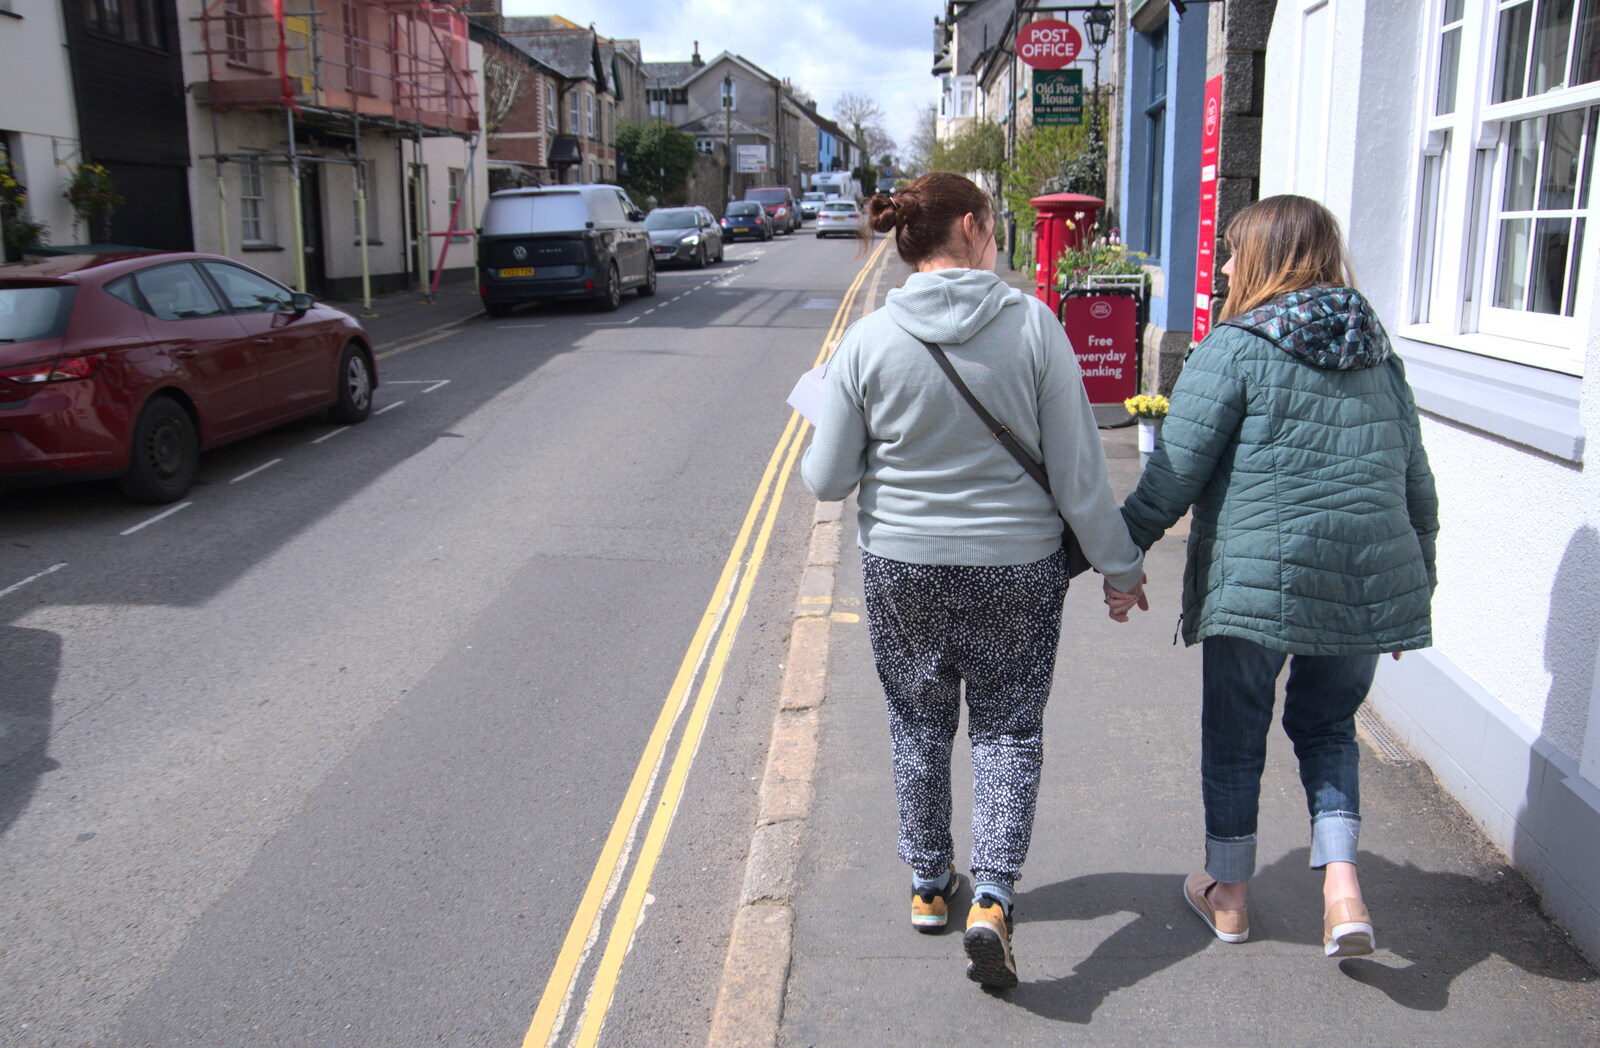 Isobel guides Grandma J back up the road from Easter in South Zeal and Moretonhampstead, Devon - 9th April